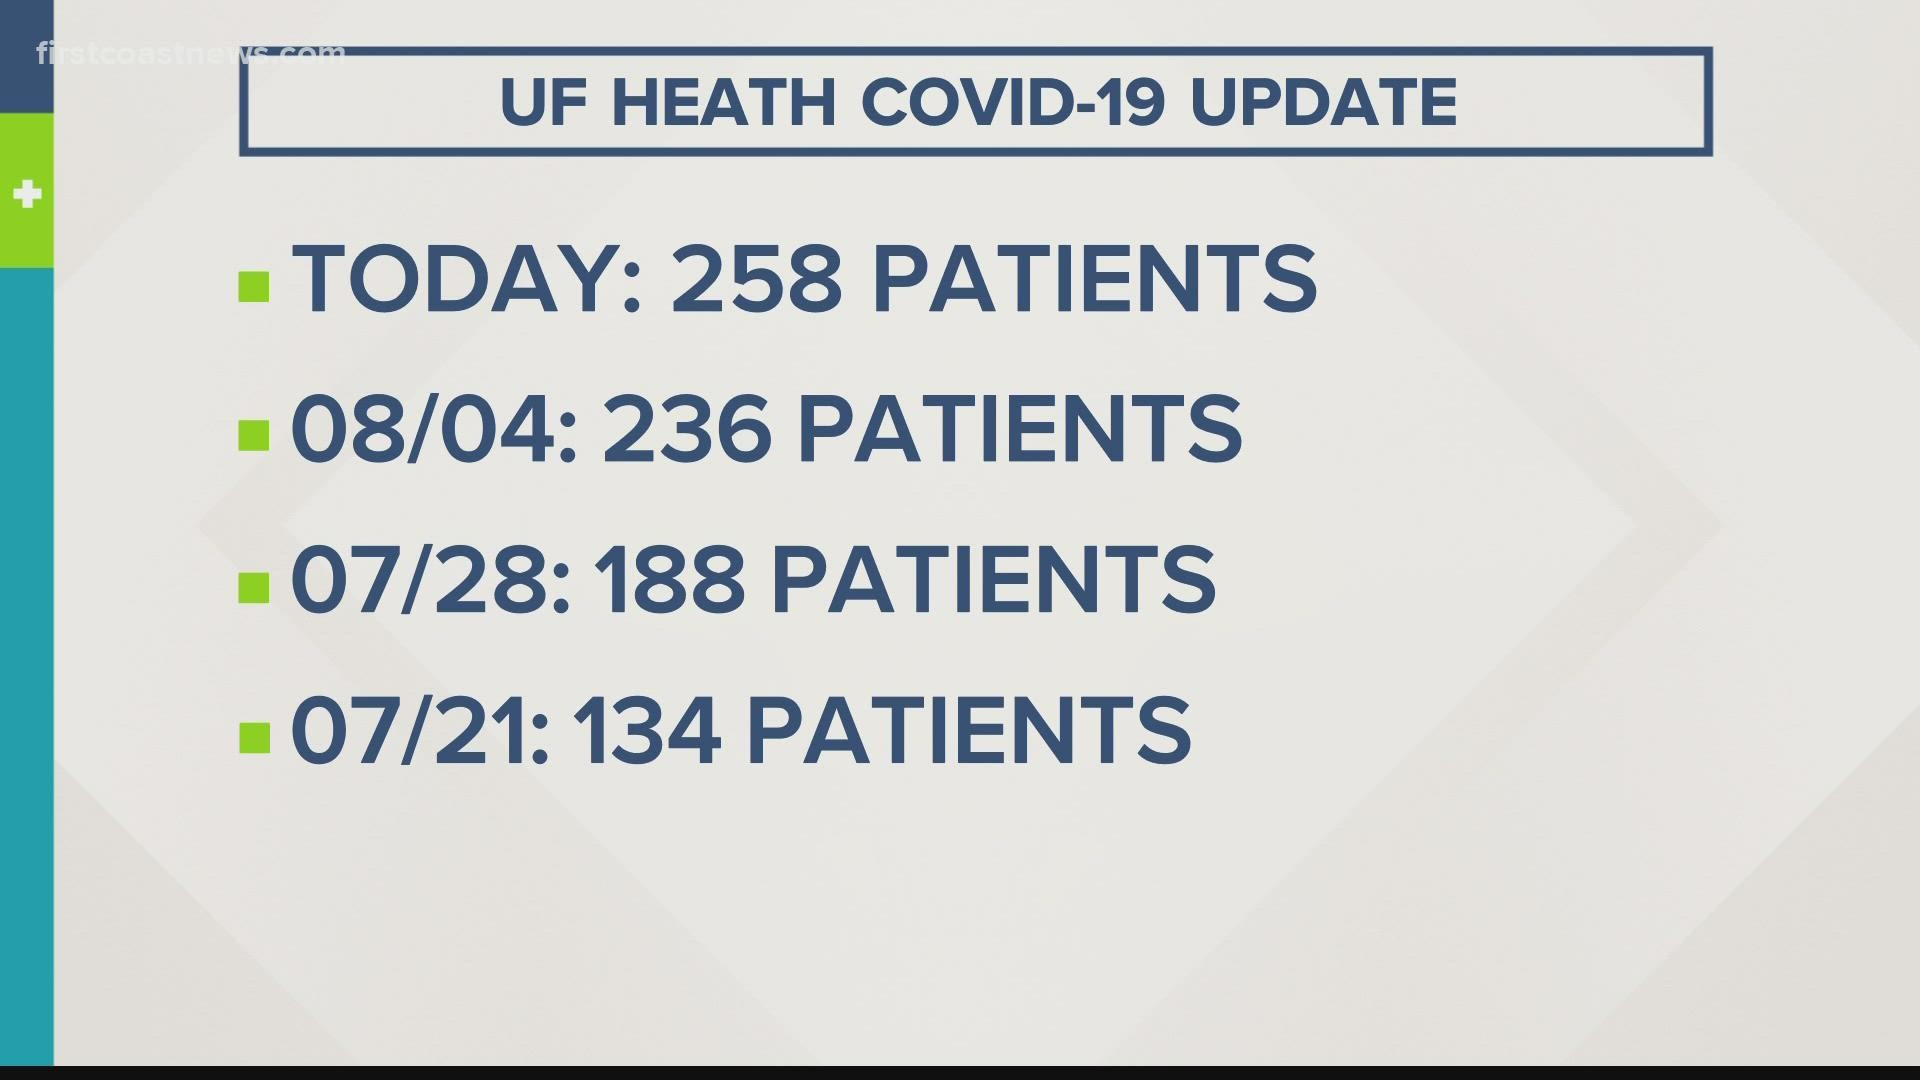 Nearly 1 in 4 patients with COVID-19 at UF Health Jacksonville are in the ICU.